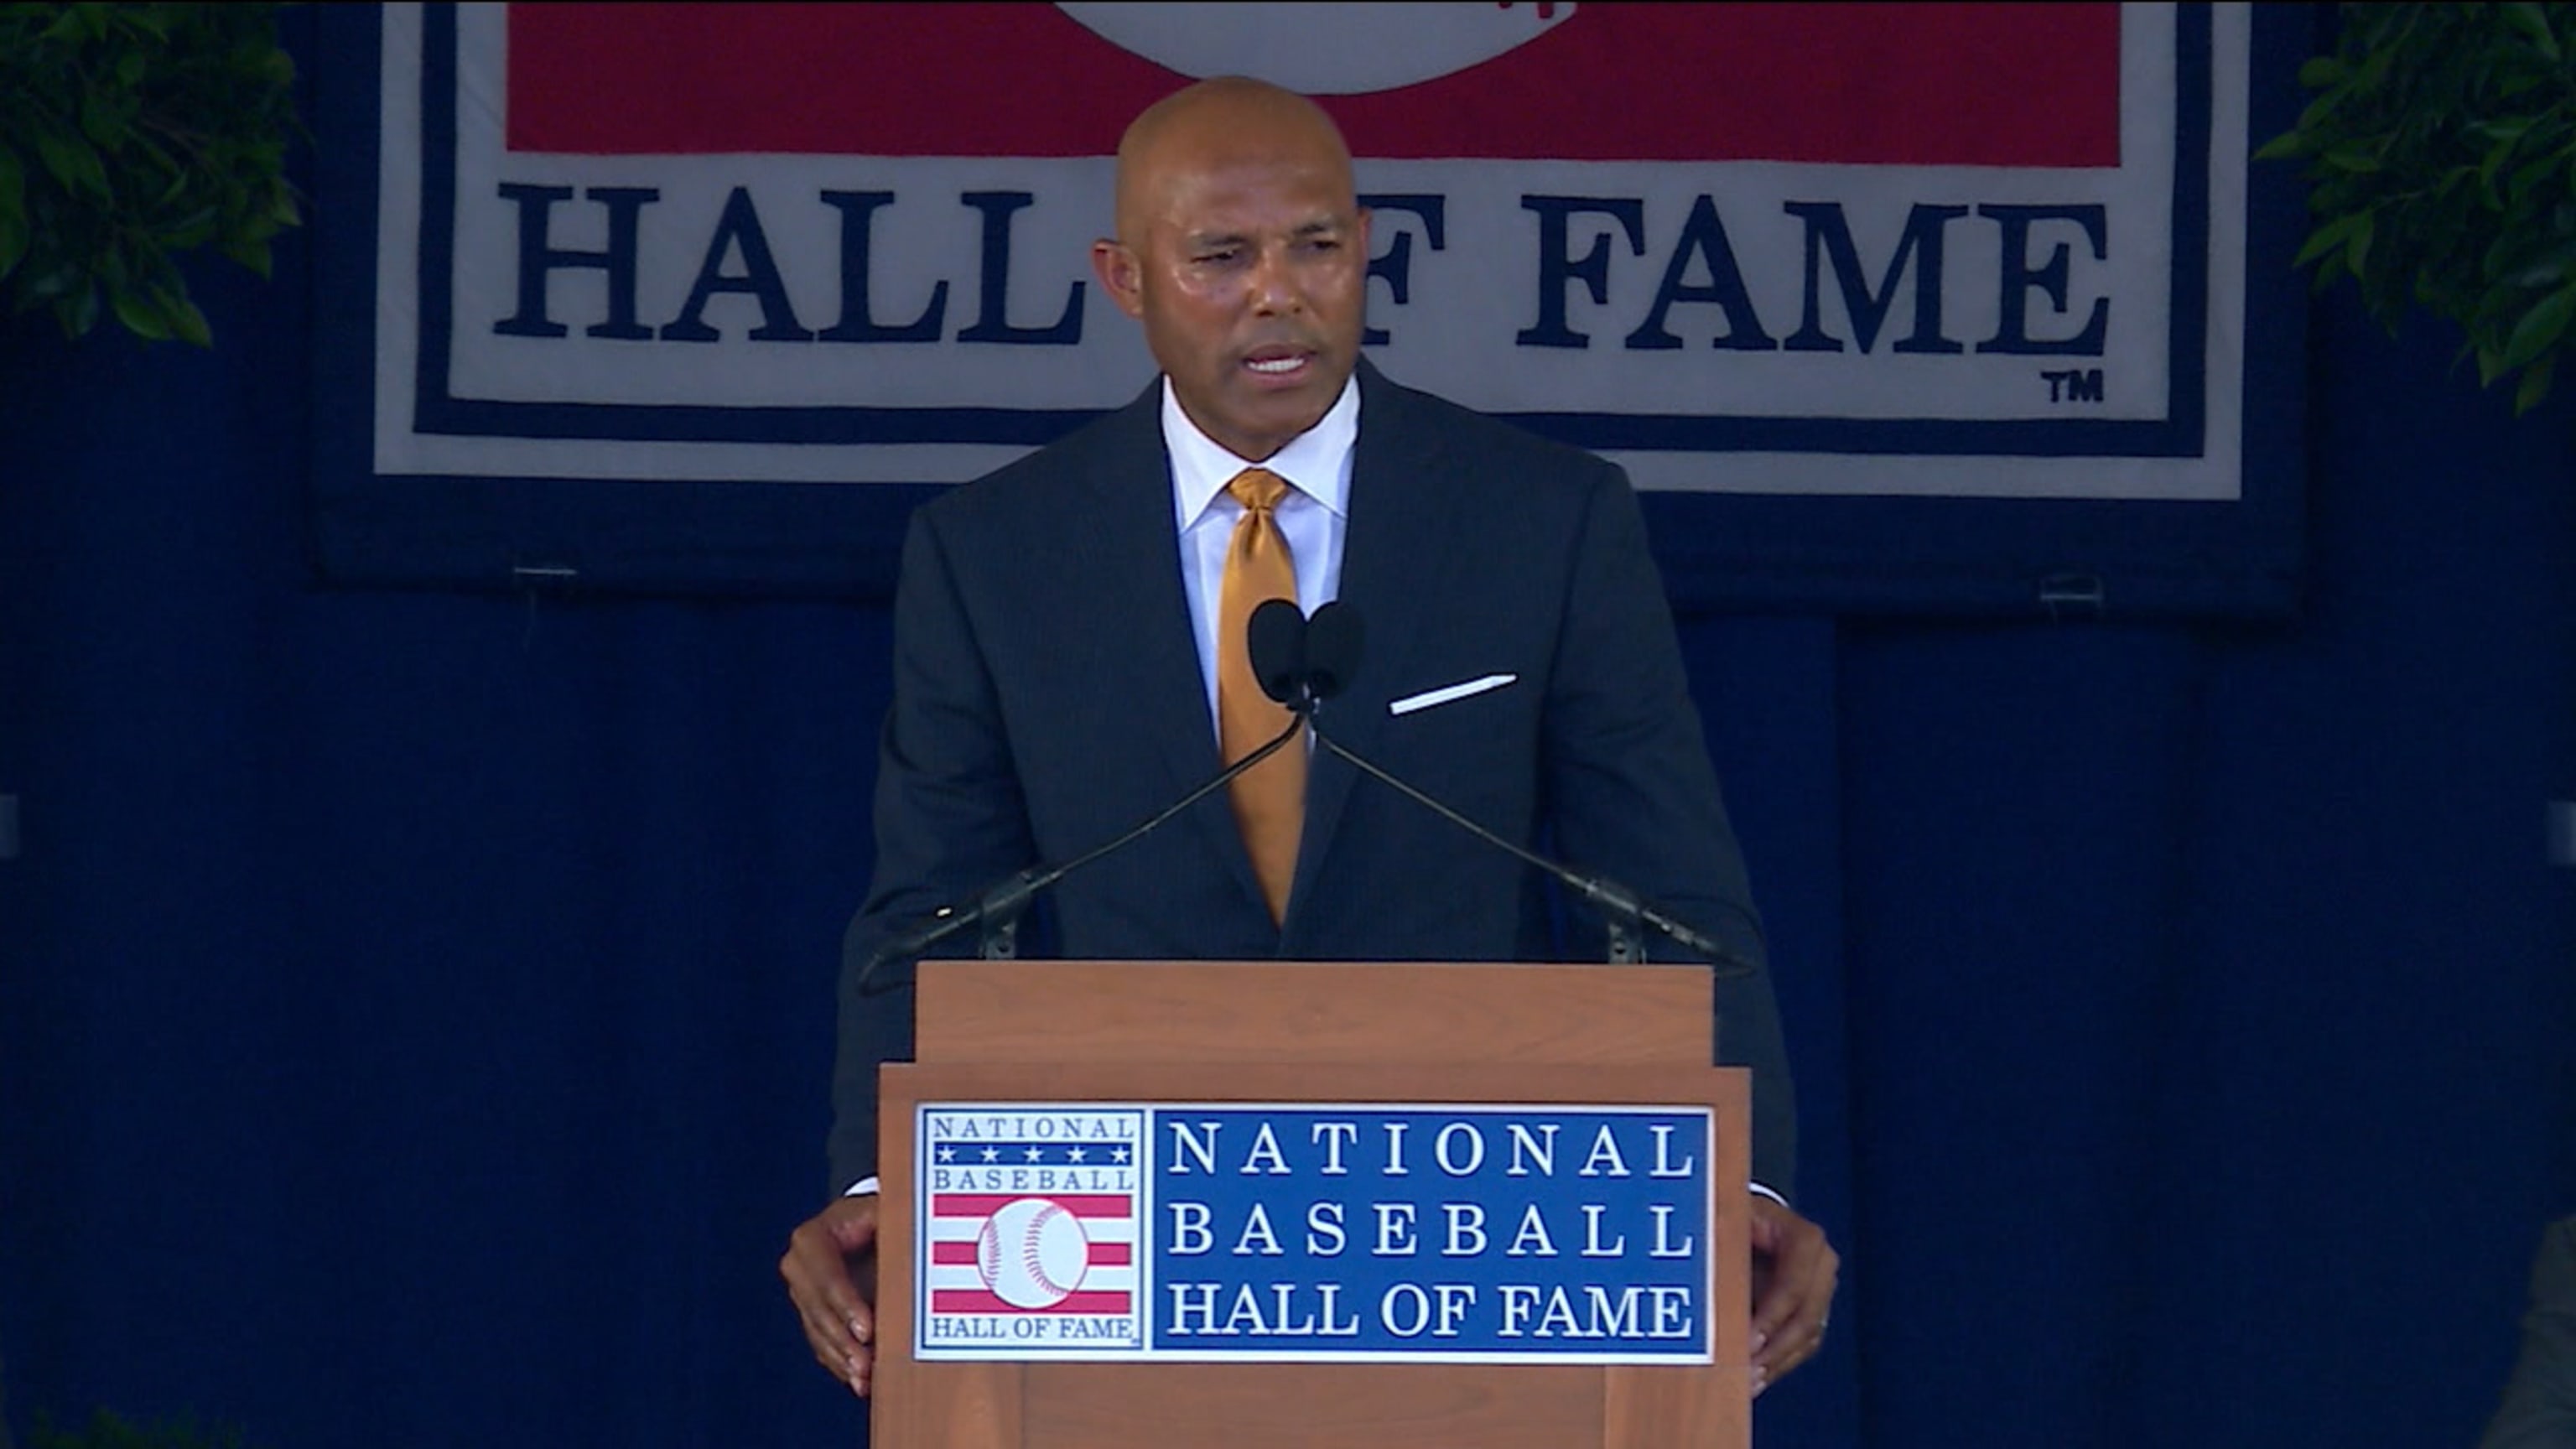 Mariano Rivera closes Hall of Fame induction ceremony, Local Sports